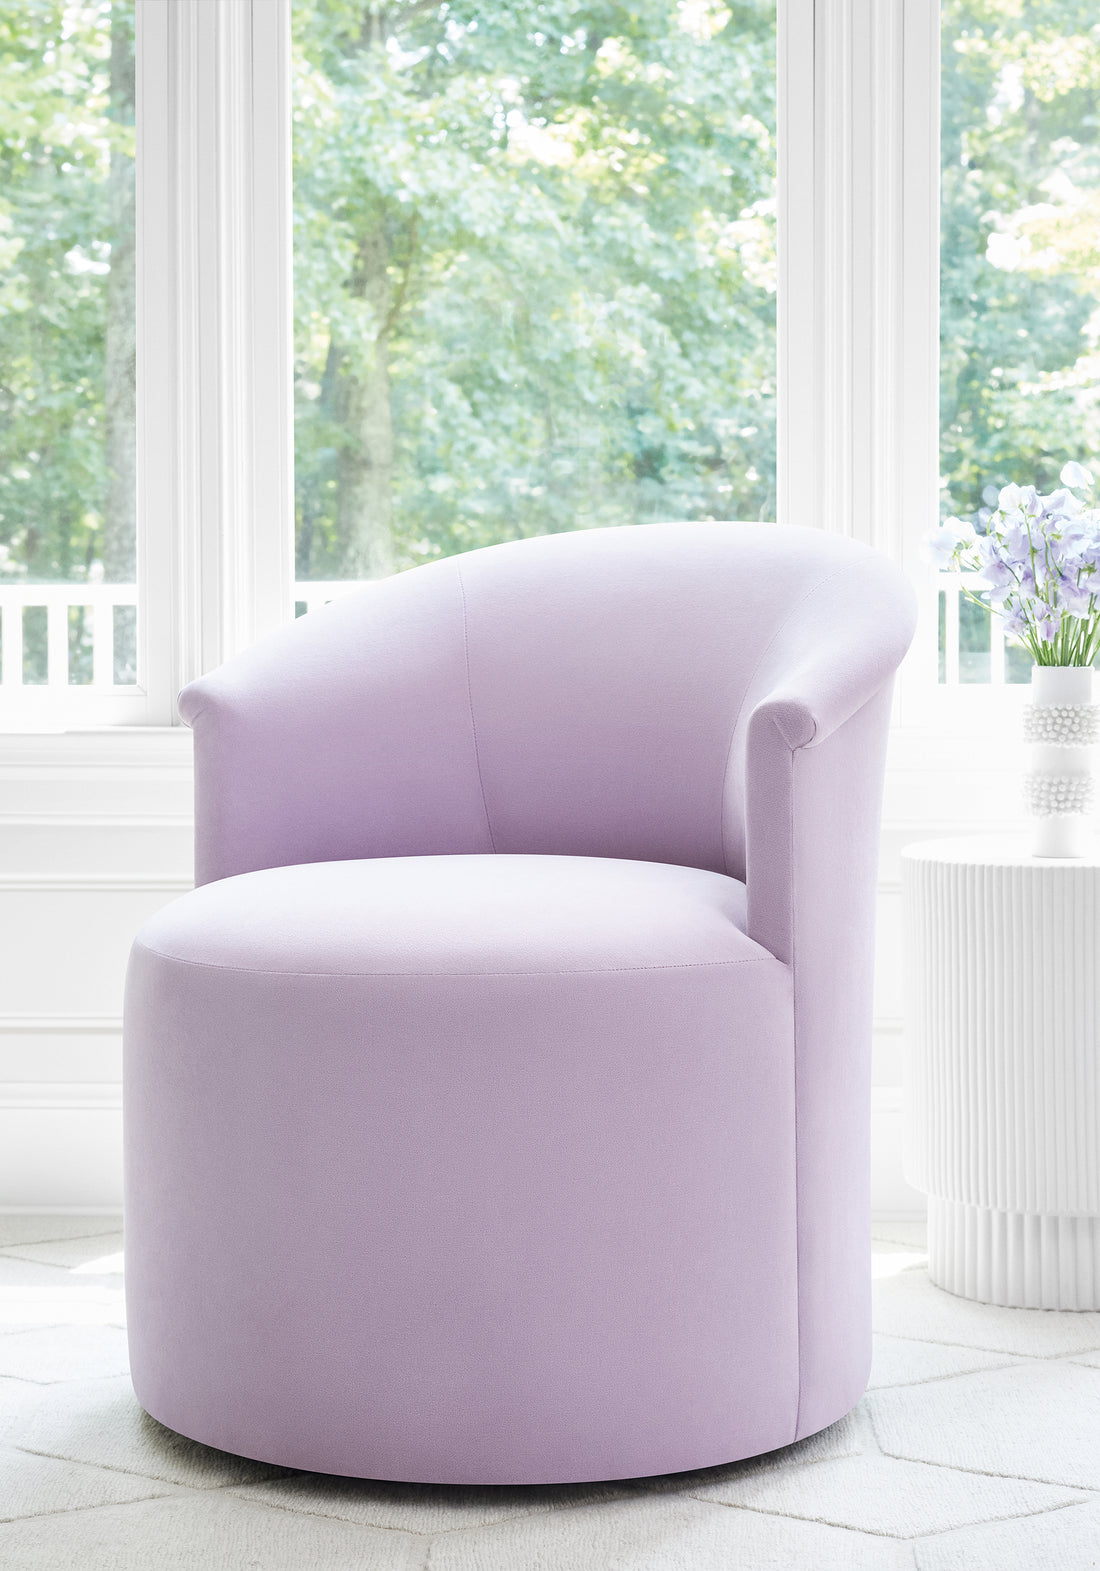 Ashby chair with Swivel in Club Velvet sustainable woven fabric in lilac color - pattern number W7214 by Thibaut in the Club Velvet collection